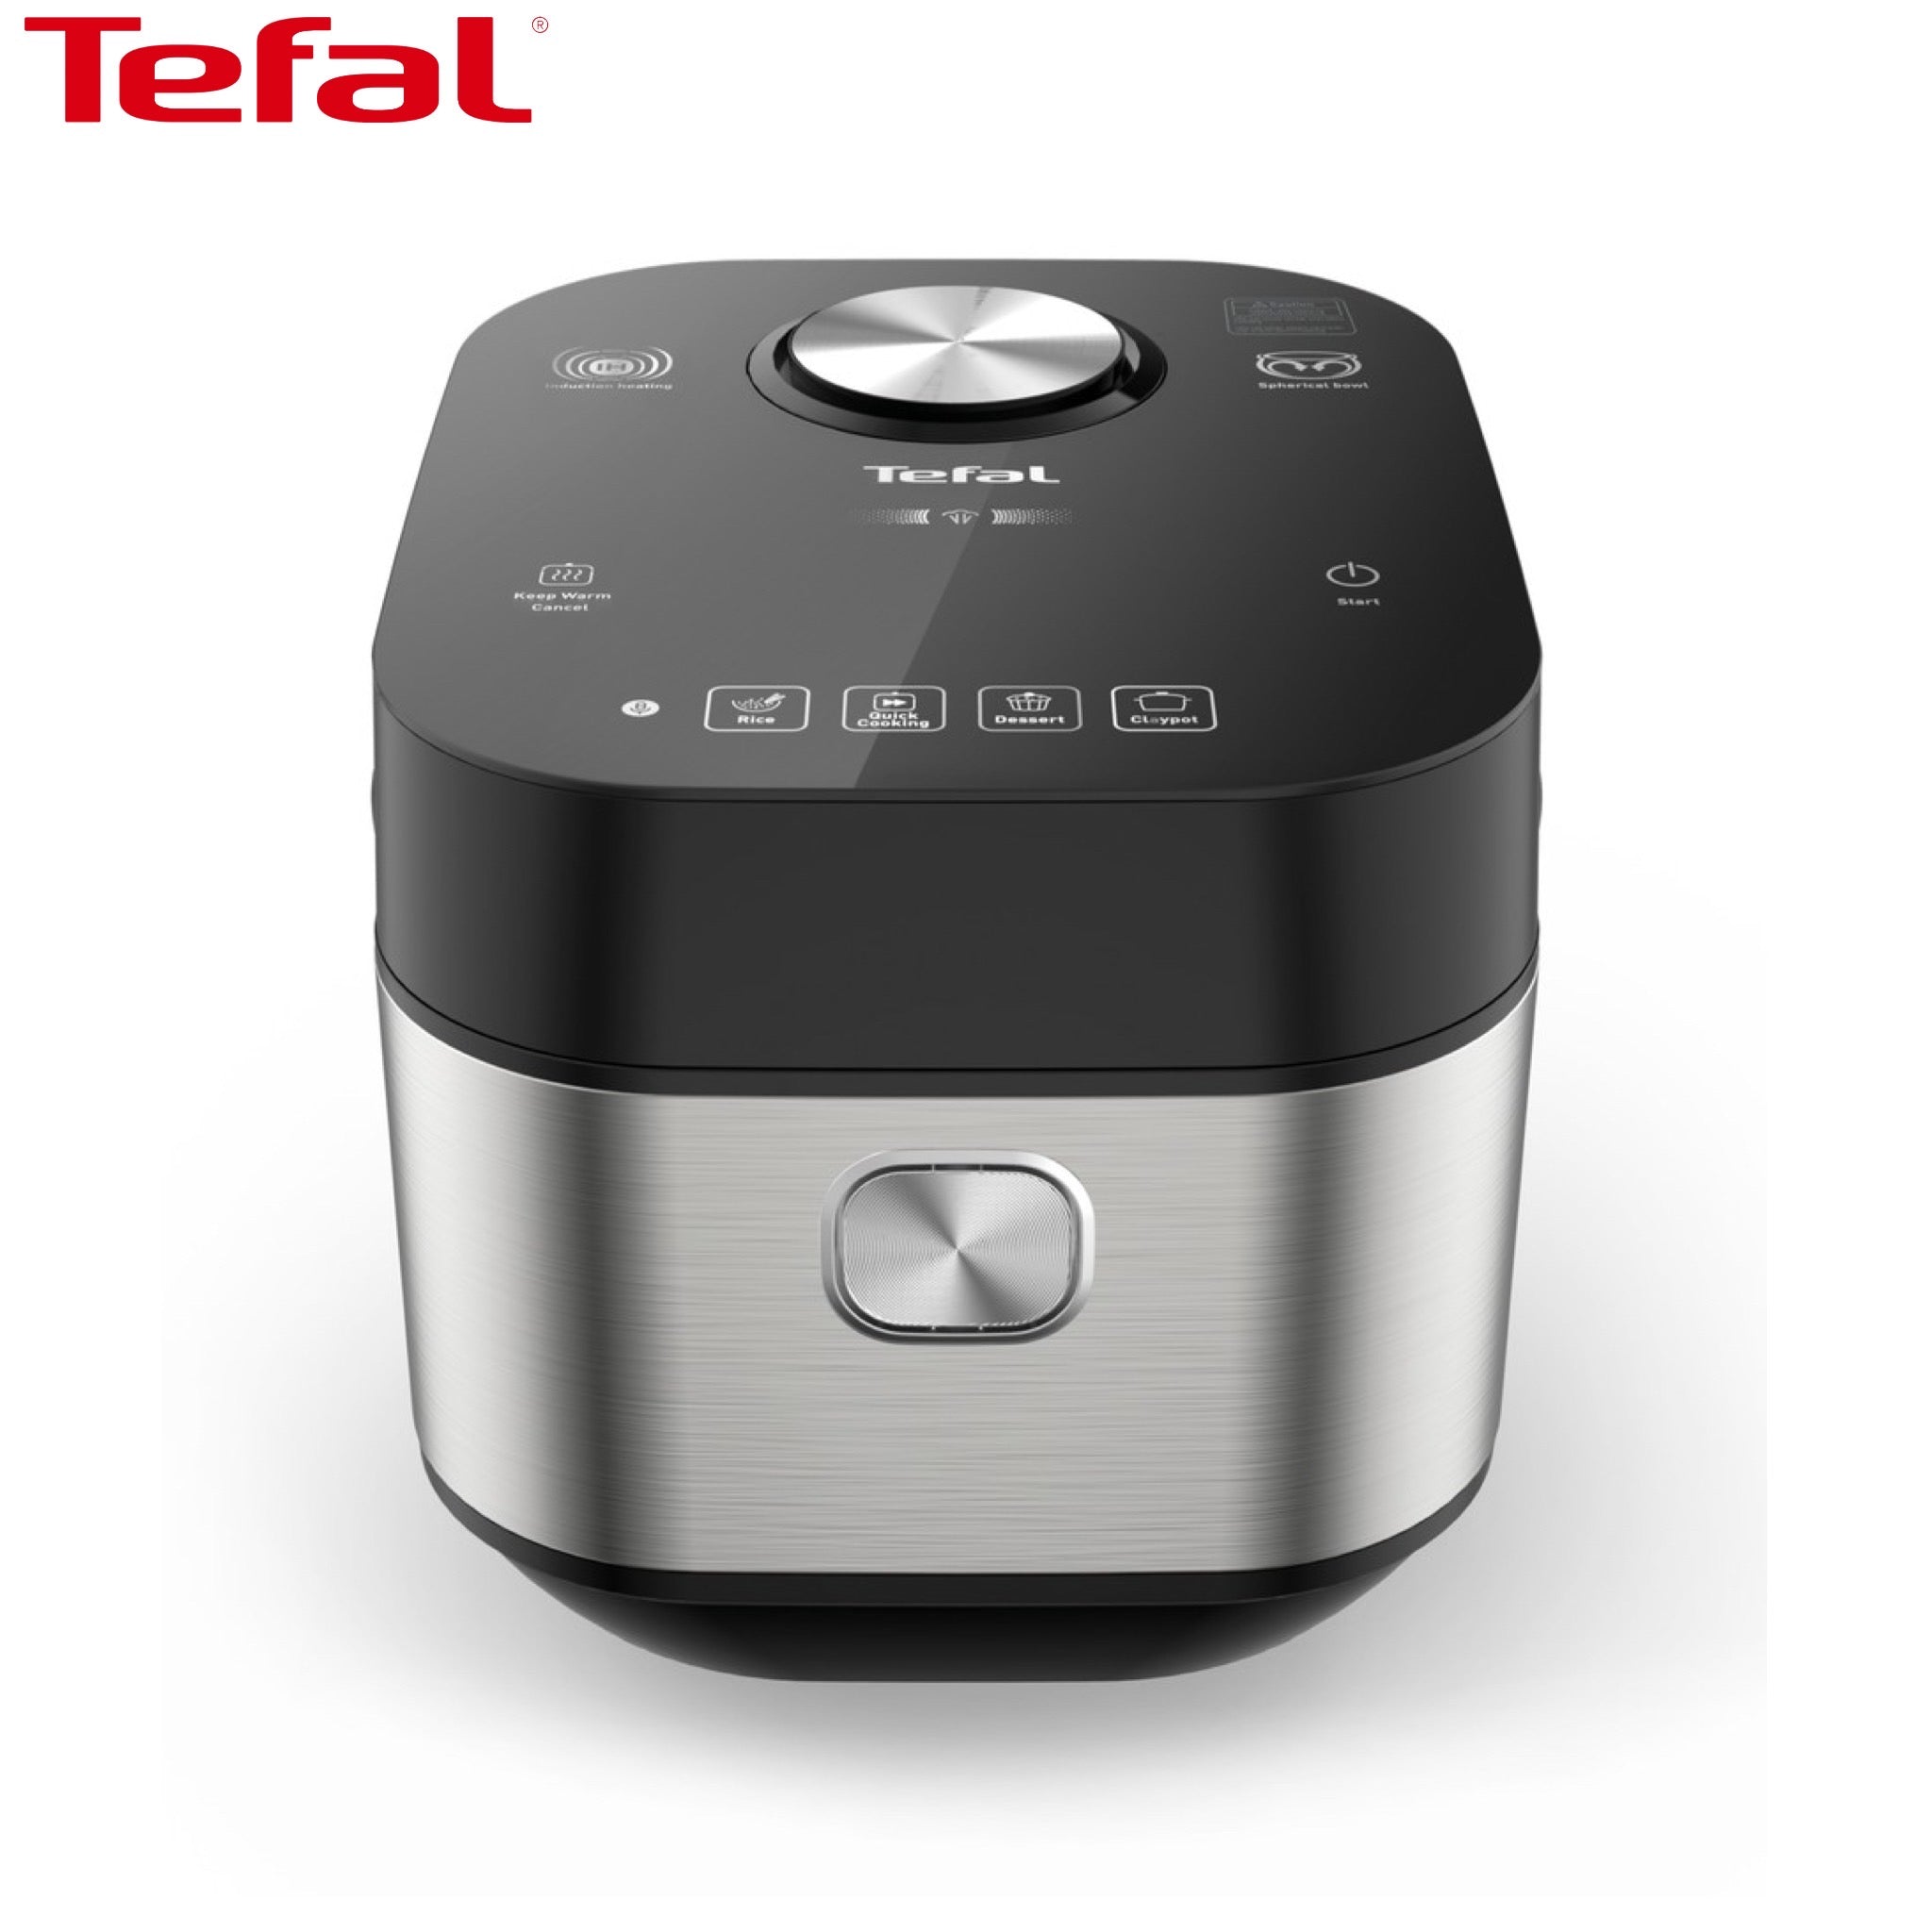 Tefal Rice Cooker Pro IH Steam - 1.8L 10 Cups